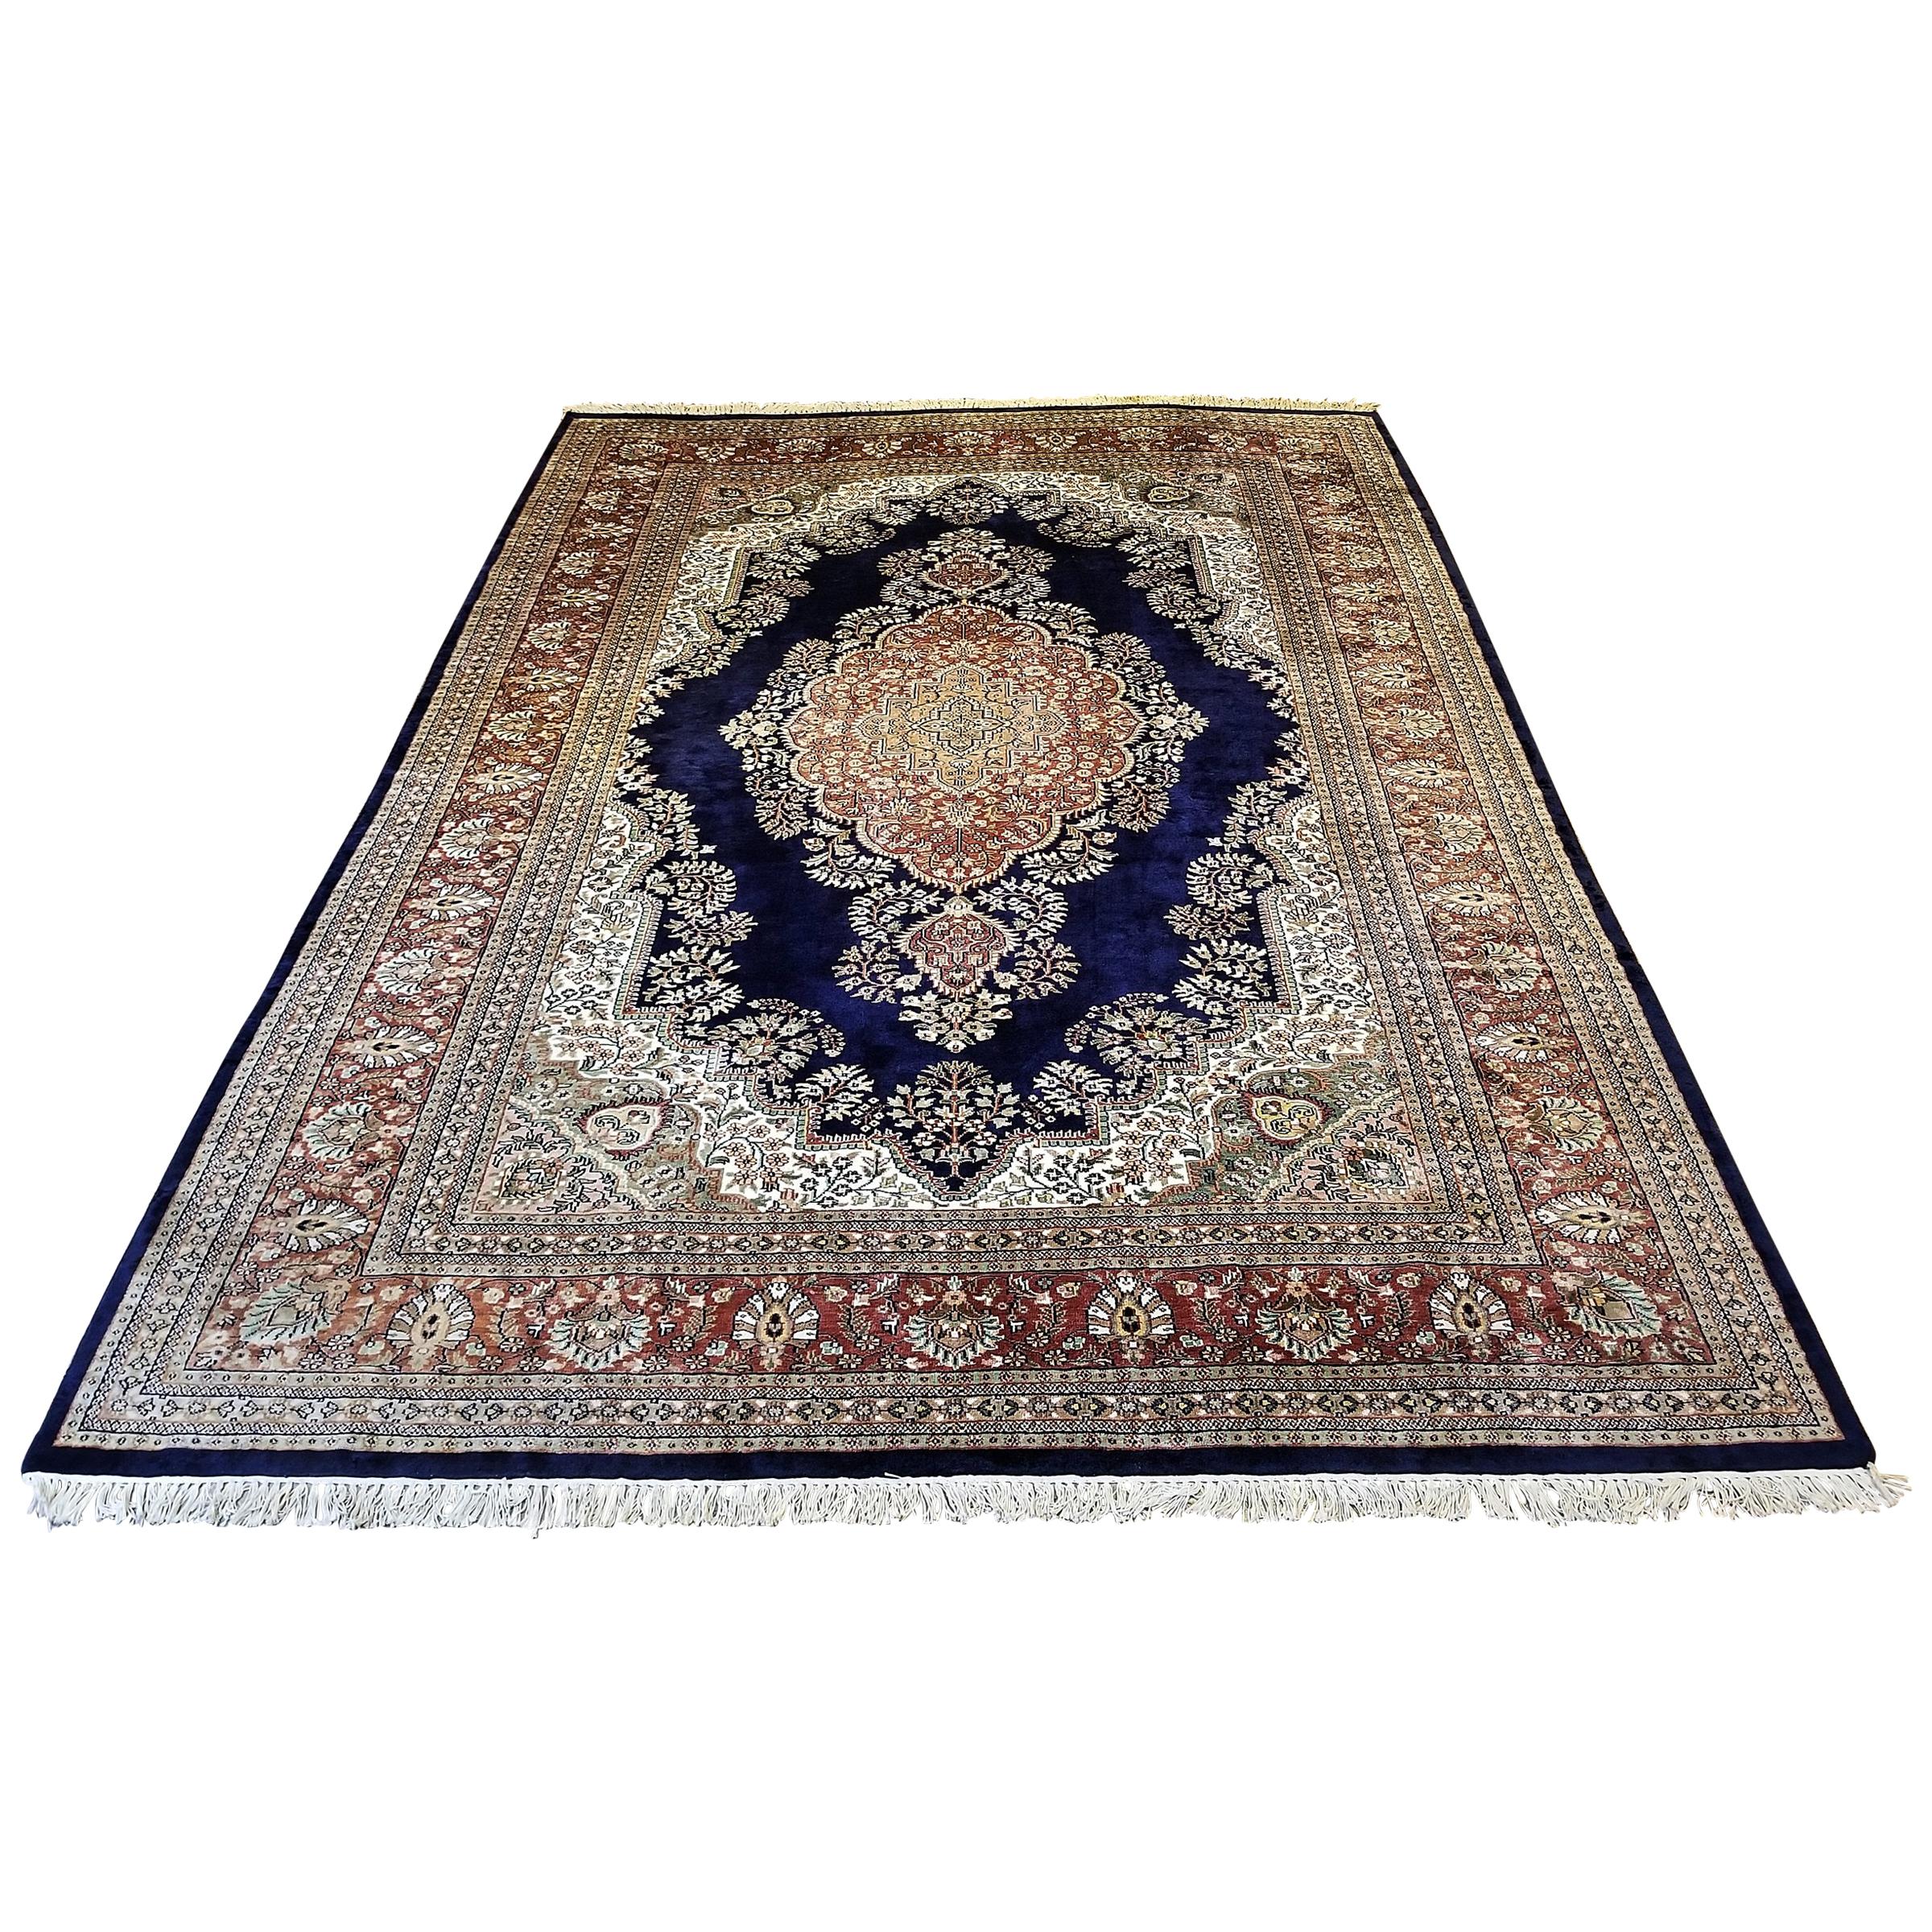 Large Indian Kashmir Silk Area Rug, Sapphire Blue, Green, Brown and Cream